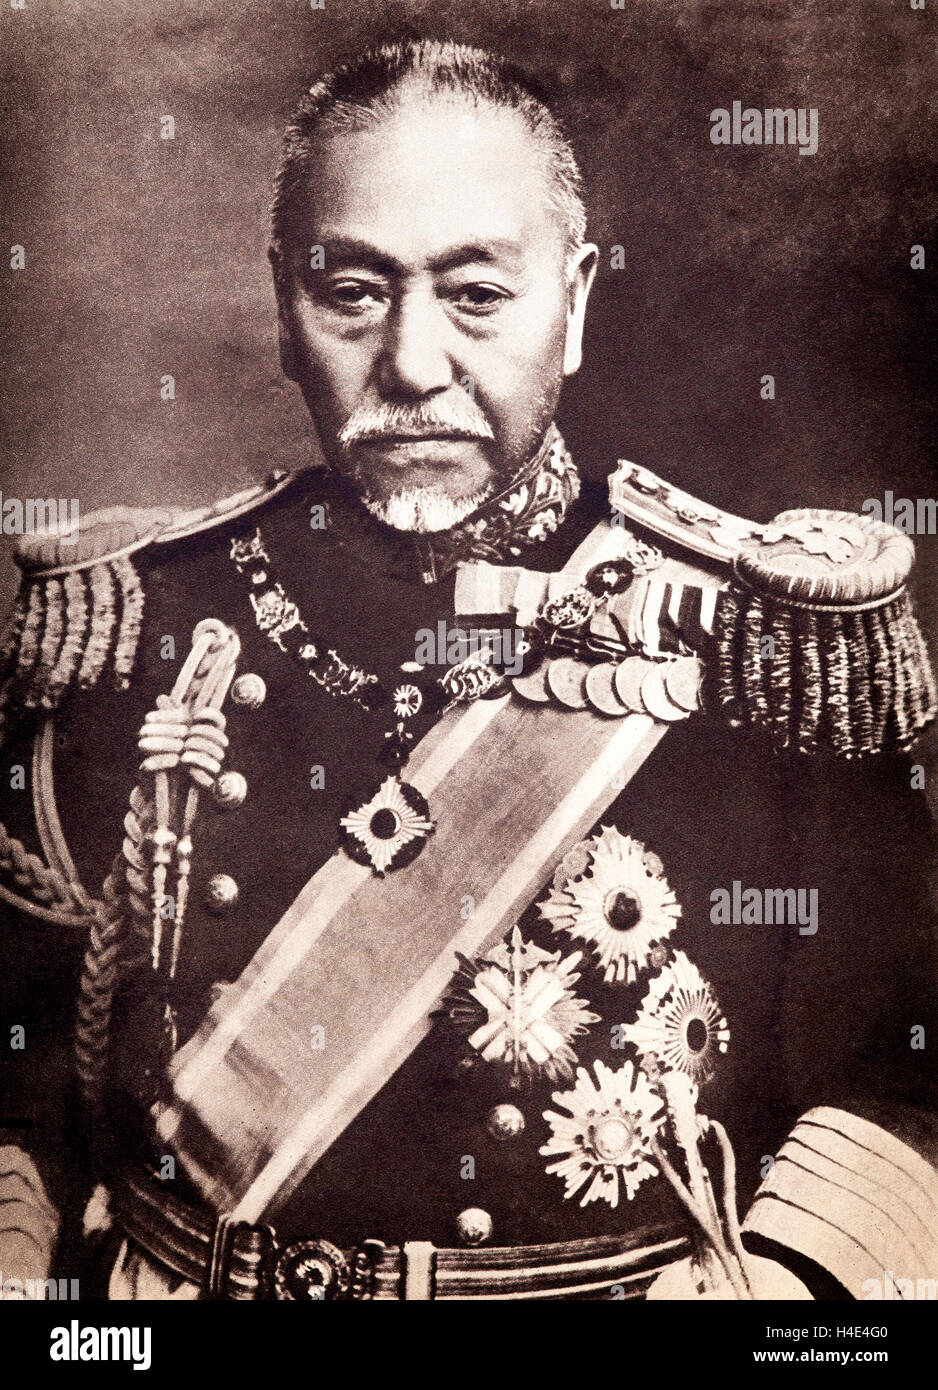 Marshal-Admiral Marquis Tōgō Heihachirō,  (1848 – 1934), was a gensui or admiral of the fleet in the Imperial Japanese Navy and one of Japan's greatest naval heroes.  During the Russo-Japanese War, Tōgō engaged the Russian navy at Port Arthur, or  Lüshun Port in China and the Yellow Sea in 190,. He commanded the Japanese naval forces at the destruction of the Imperial Russian Navy's Baltic Fleet at the Battle of Tsushima in May 1905. Stock Photo